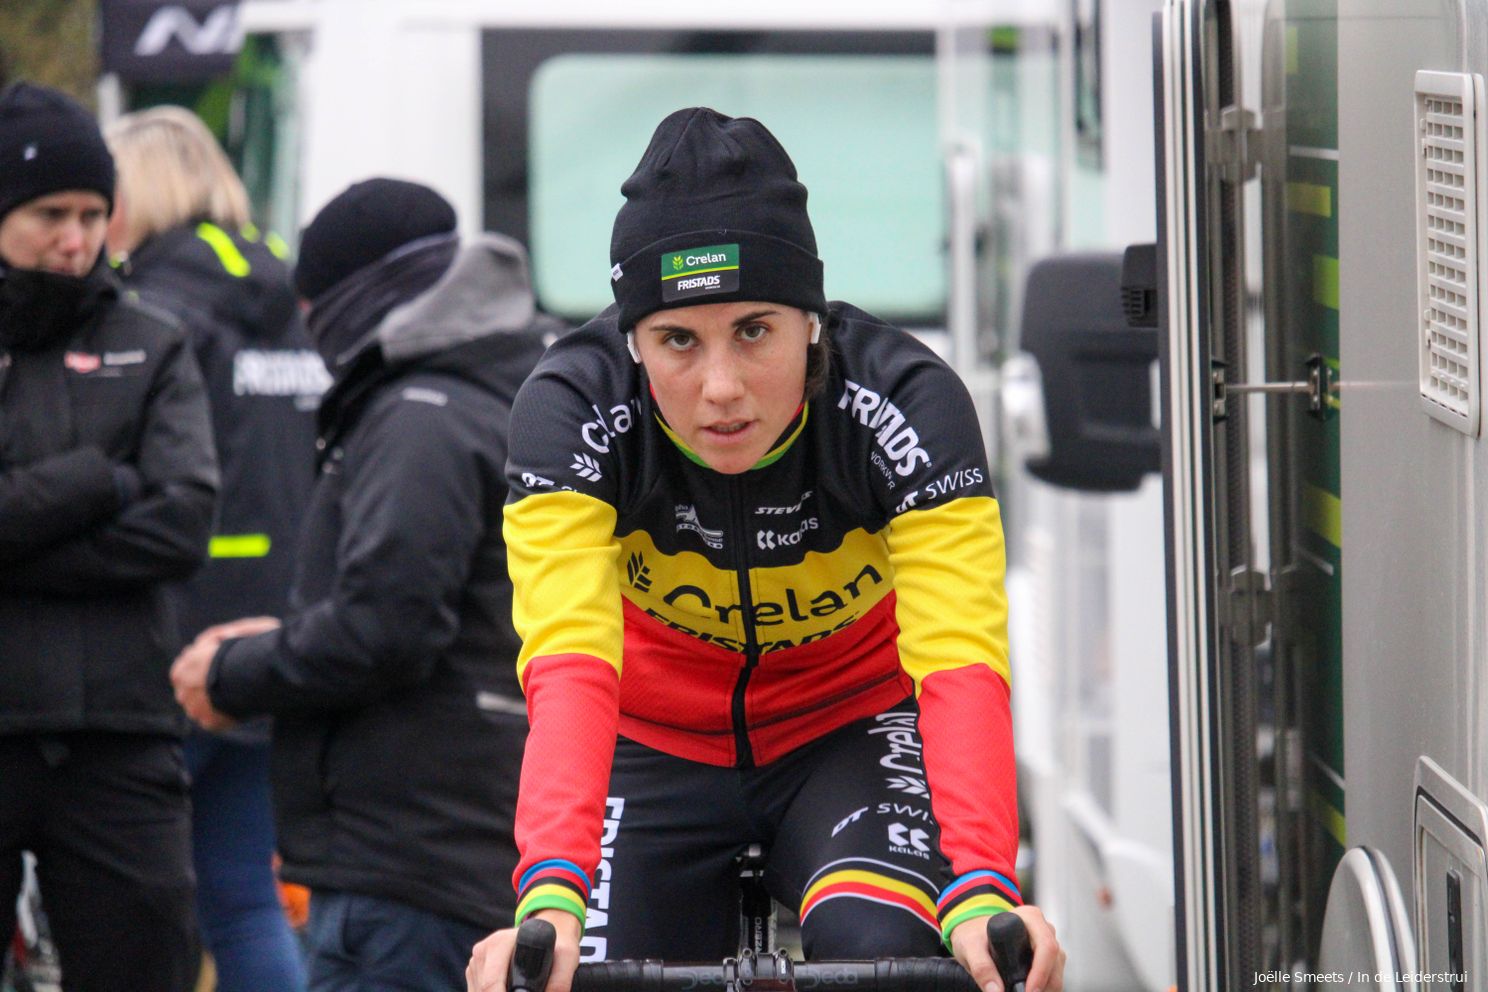 She has been unable to ride as a Belgian champion for almost her entire career, but this year it could be very difficult.